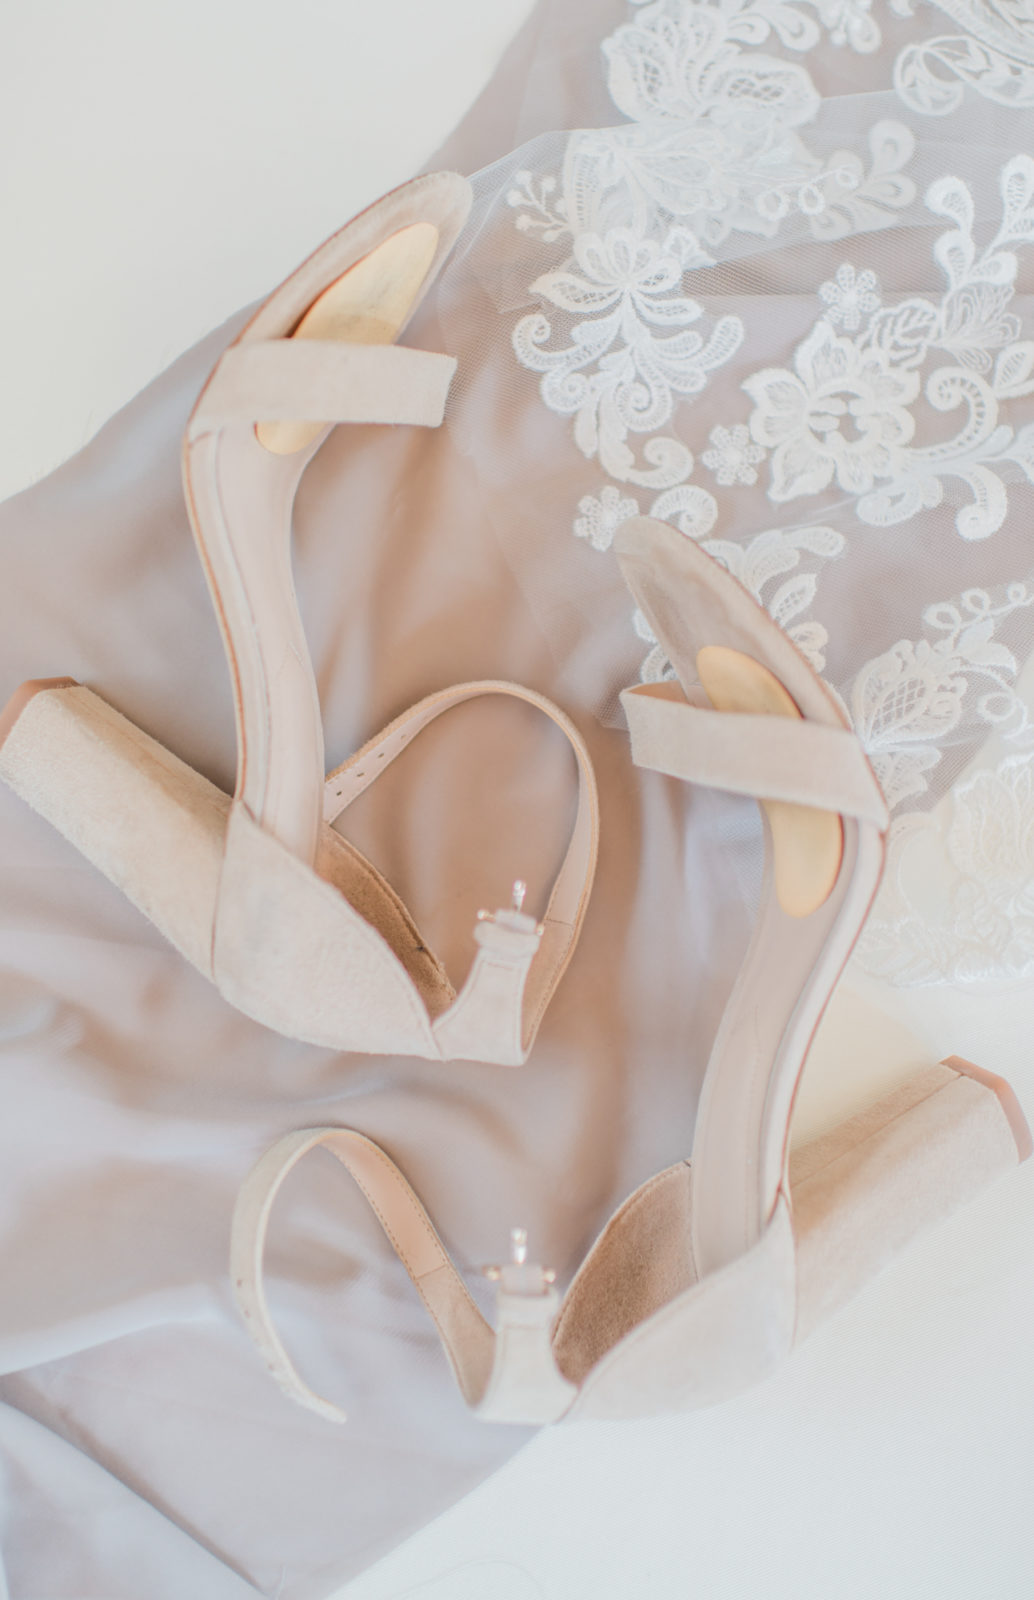 Lovely Blush Wedding at Azuridge with a Tear-Filled First Look - featured on Bronte Bride